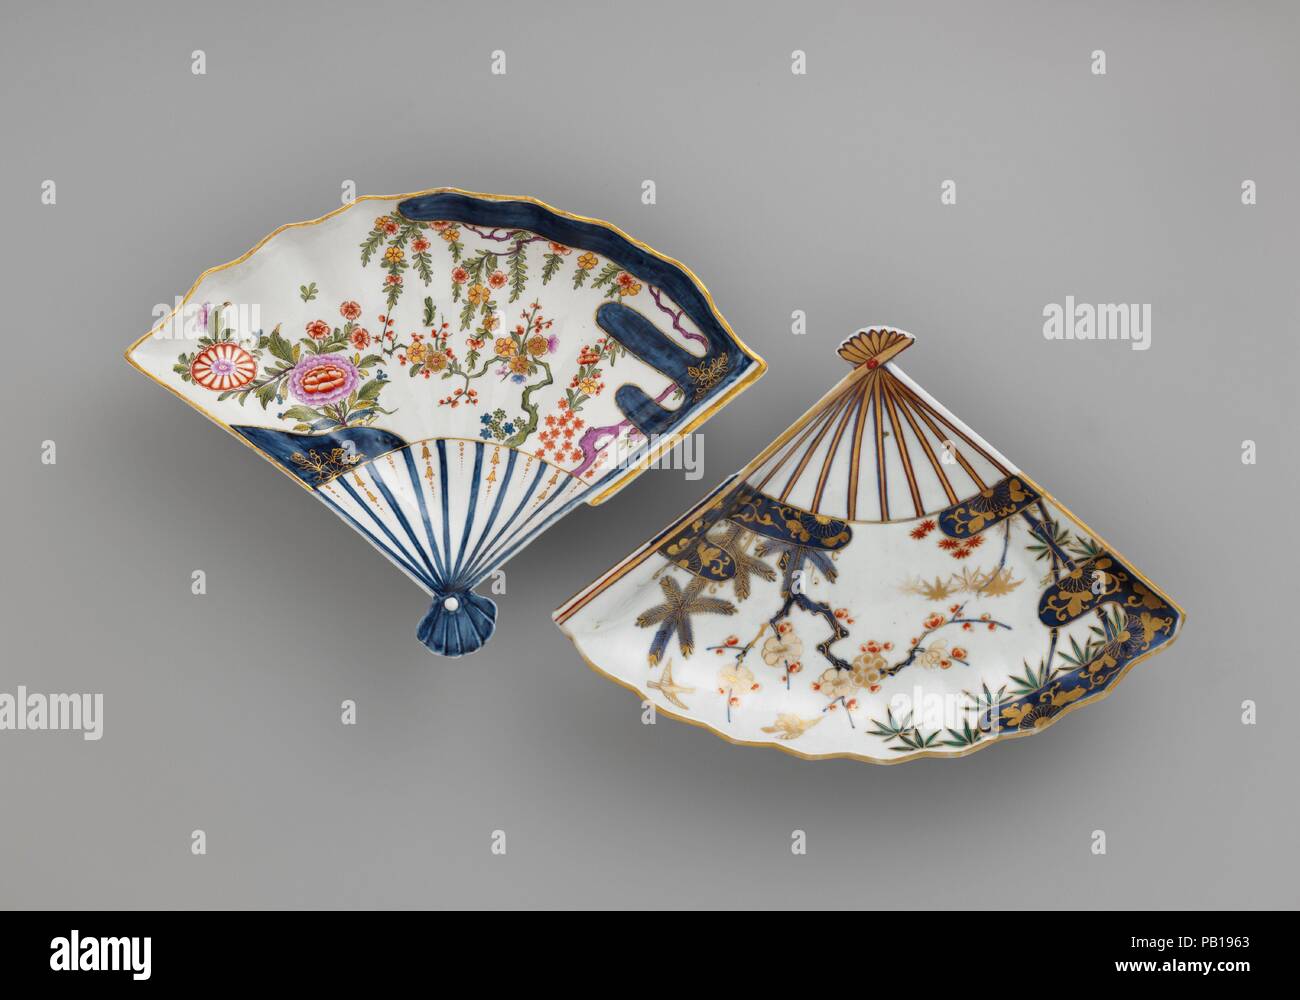 Fan-shaped dish. Culture: Austrian, Vienna. Dimensions: H. 2-3/8 in. (6.0 cm.); L. 11-1/8 in. (28.3 cm.); W. 8-1/8 in. (20.6 cm.). Factory: Vienna. Factory director: Du Paquier period (1718-1744). Date: ca. 1725-30.  This dish and its Japanese prototype show a creative amalgamation of form and decoration from several sources. The shape is a Japanese invention, with precedents in paintings on fans and in fan-shaped paintings pasted on screens. The Three Friends motif of pine, bamboo, and plum has its origins in Chinese literati painting. The Du Paquier factory made the only known copies of this Stock Photo